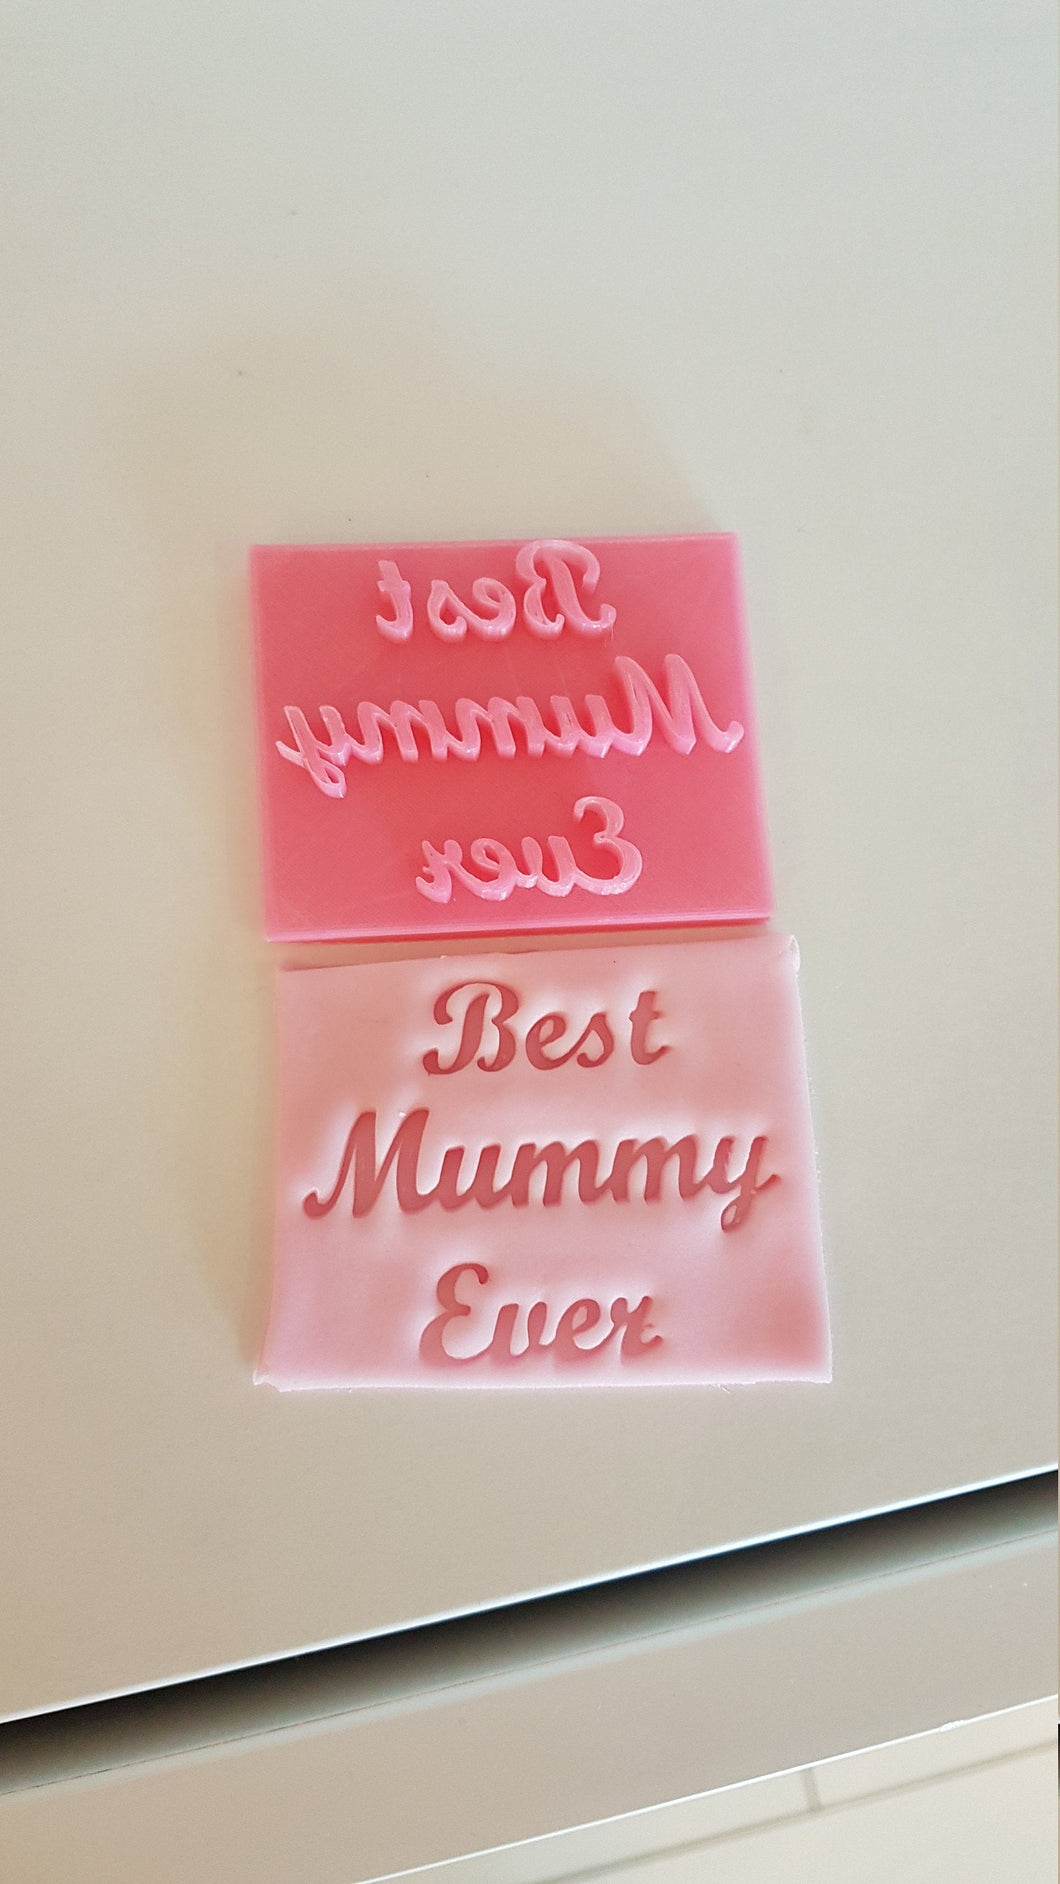 Best Mummy Ever Fancy Text Stamp|Icing|Baking|Cookie Stamp|Mother's Day Gift|Birthday|Wife|Partner|Mom